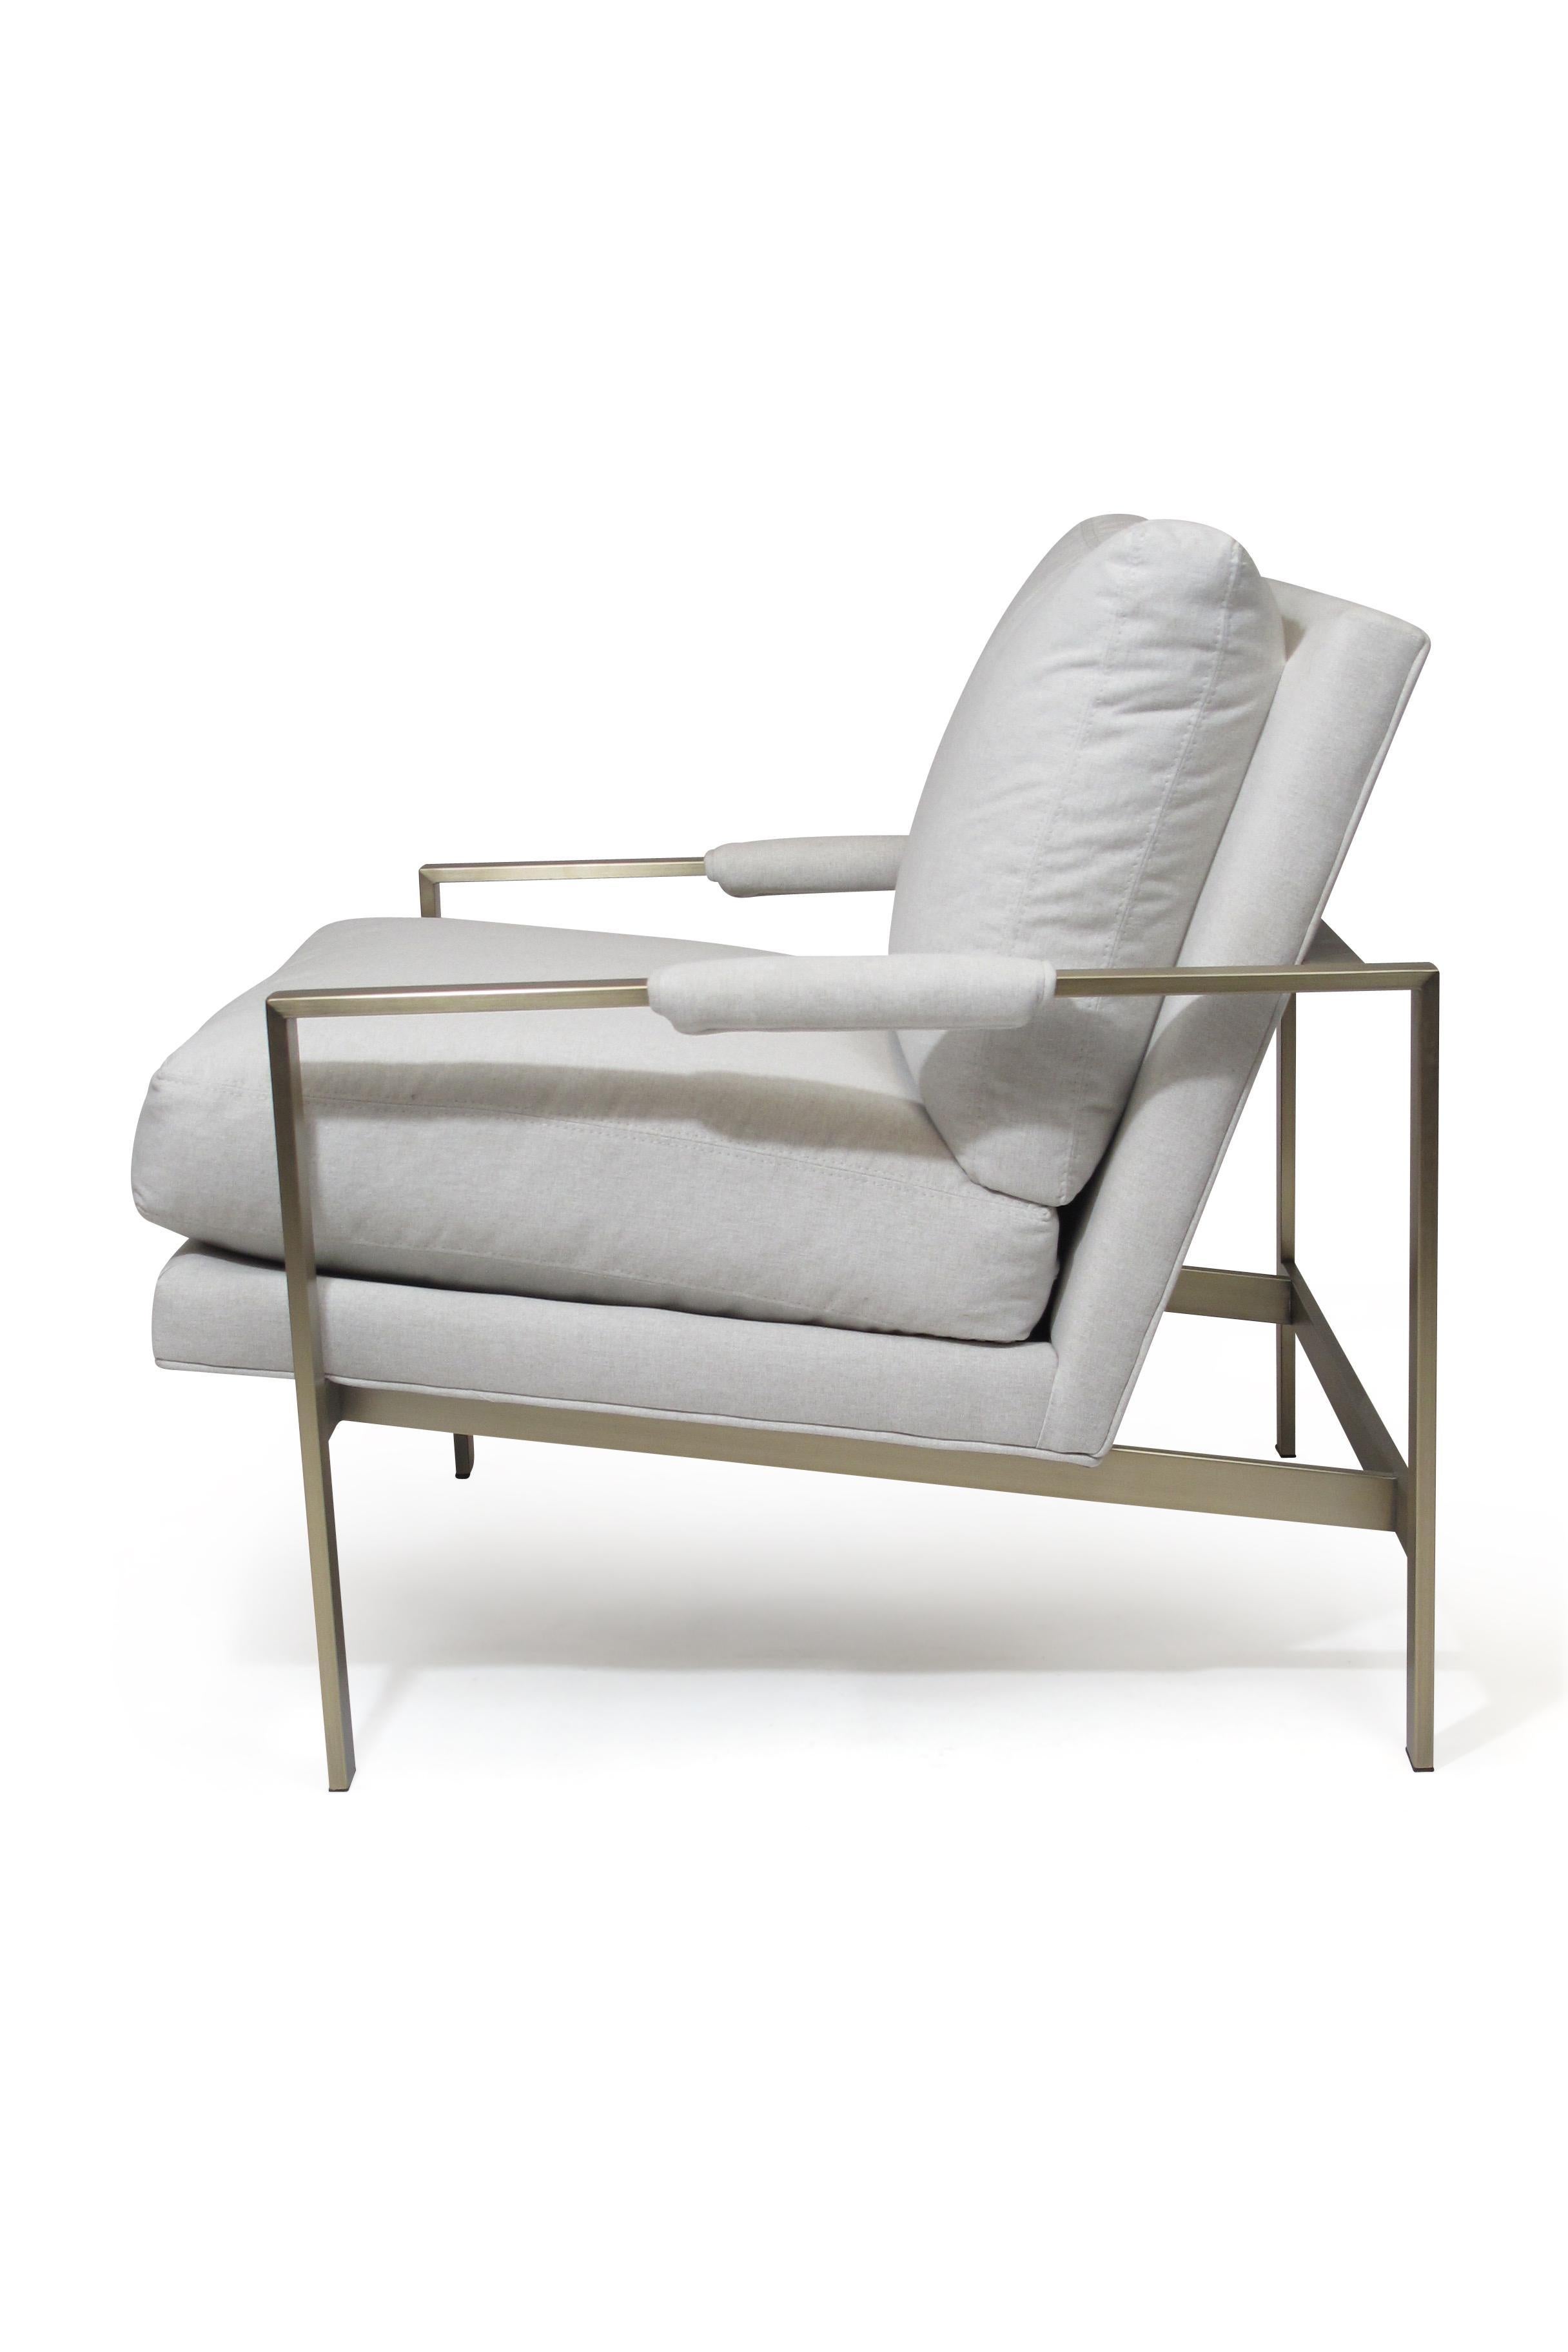 Midcentury Milo Baughman Brass Frame Lounge Chairs in Off-White Fabric In Good Condition For Sale In Oakland, CA